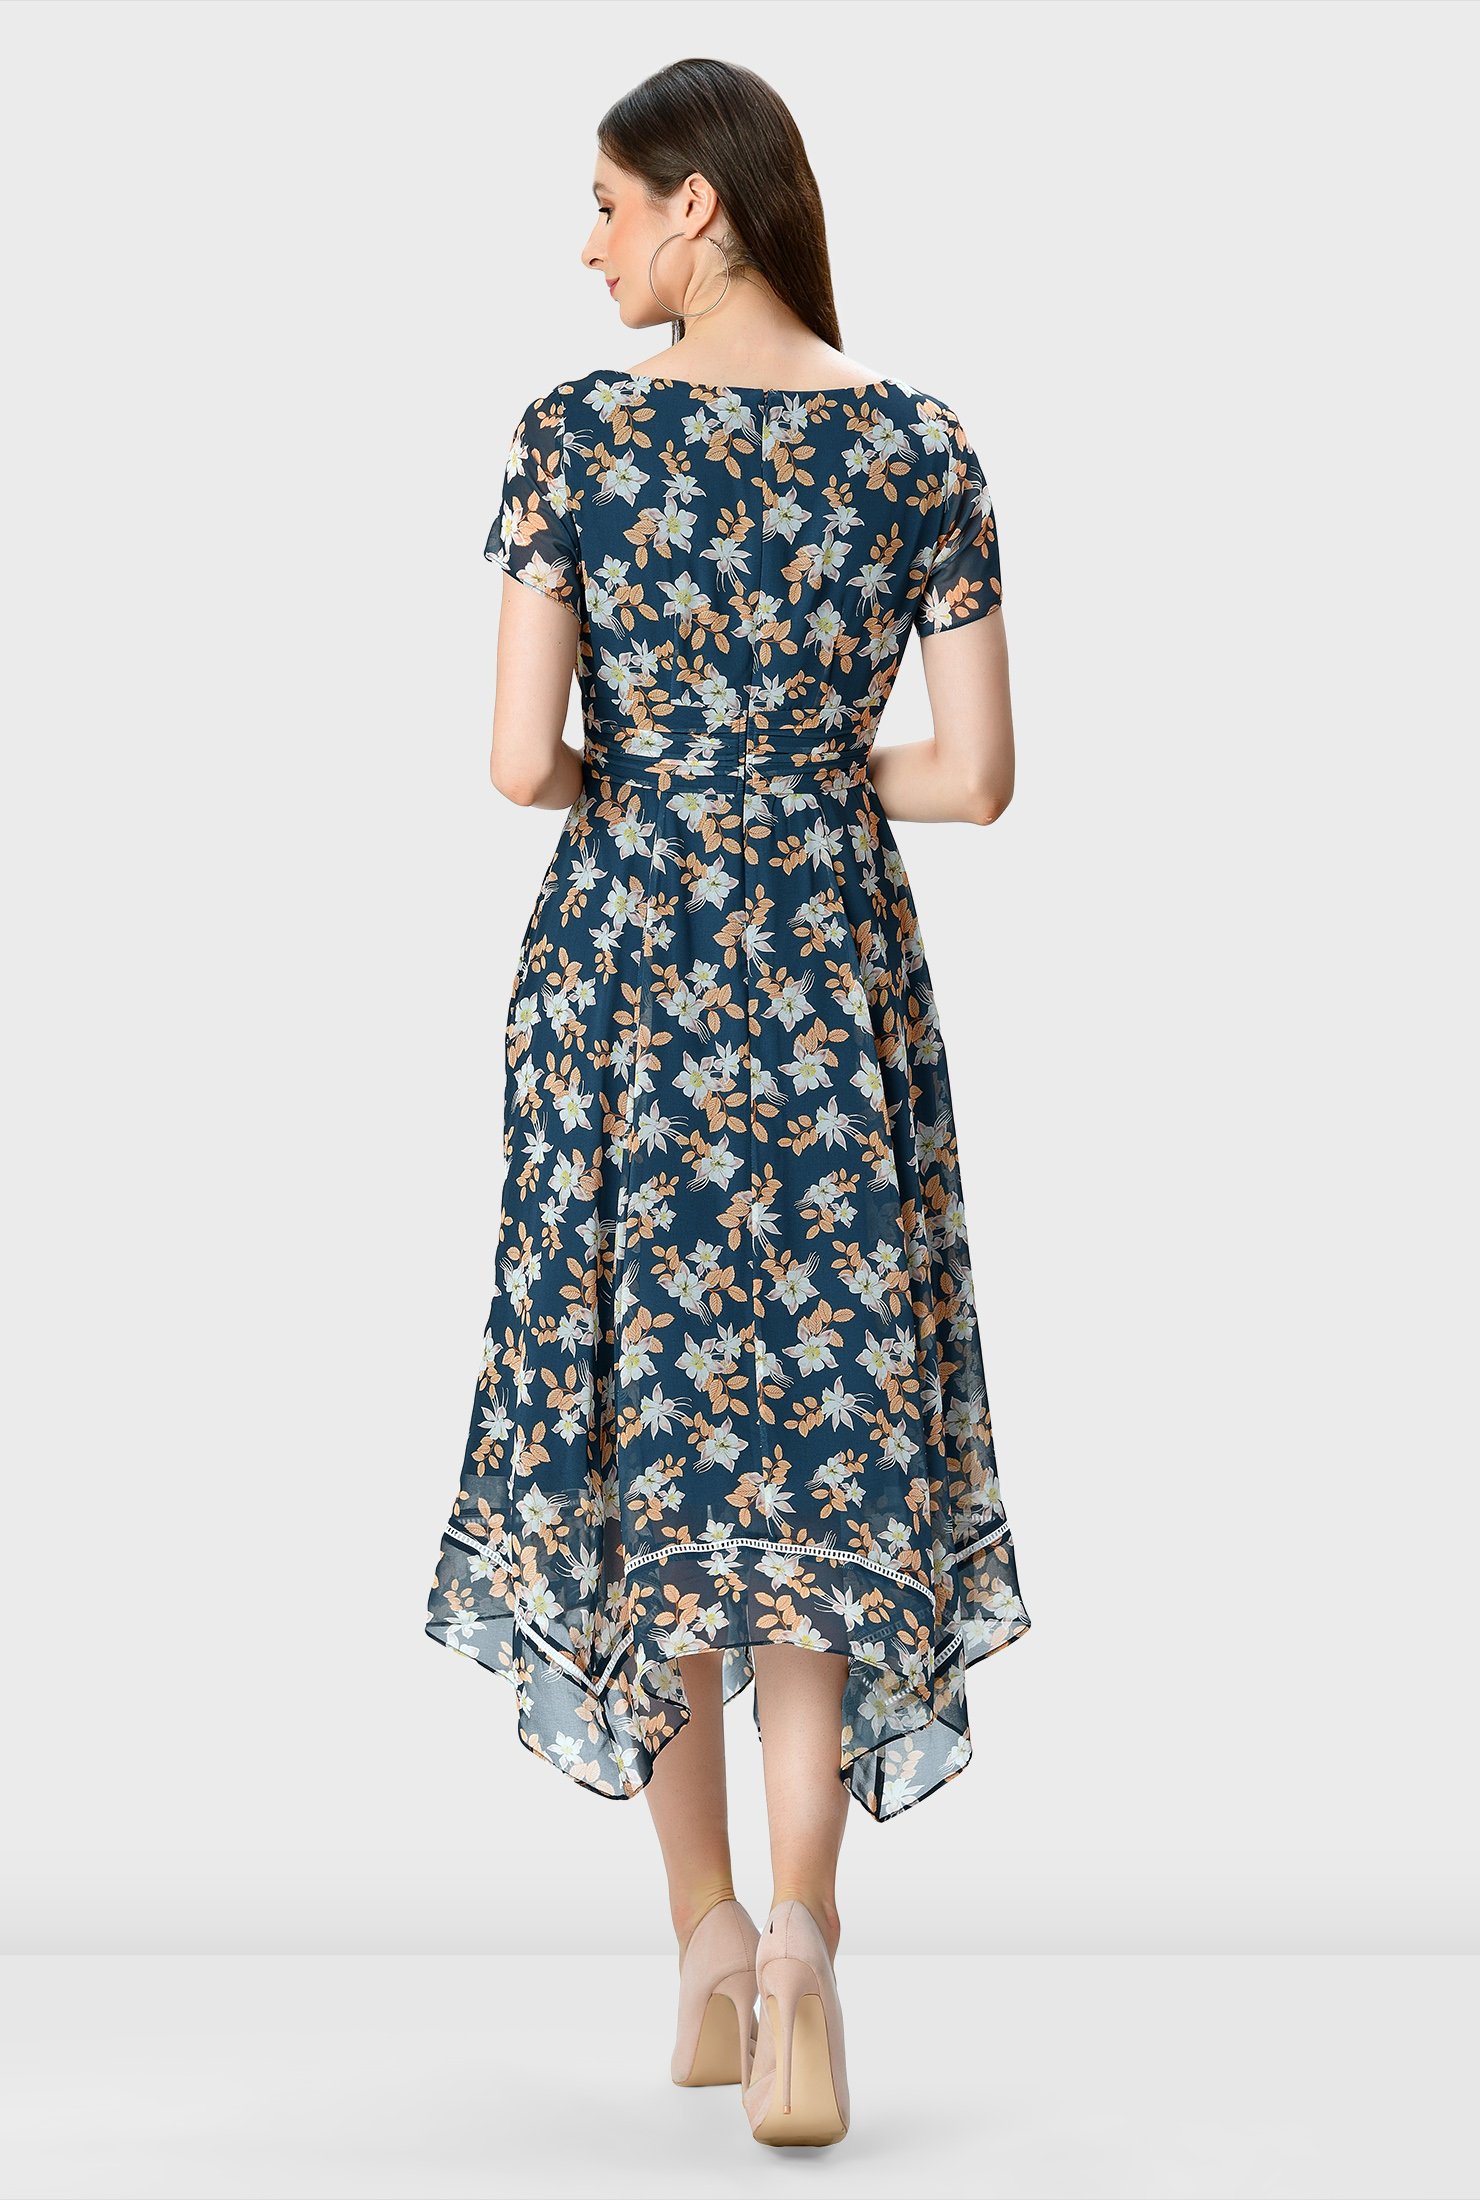 Our floral print georgette dress with lattice trim at the floaty handkerchief hem is designed with effortlessly flattering surplice styling and a full flare skirt.